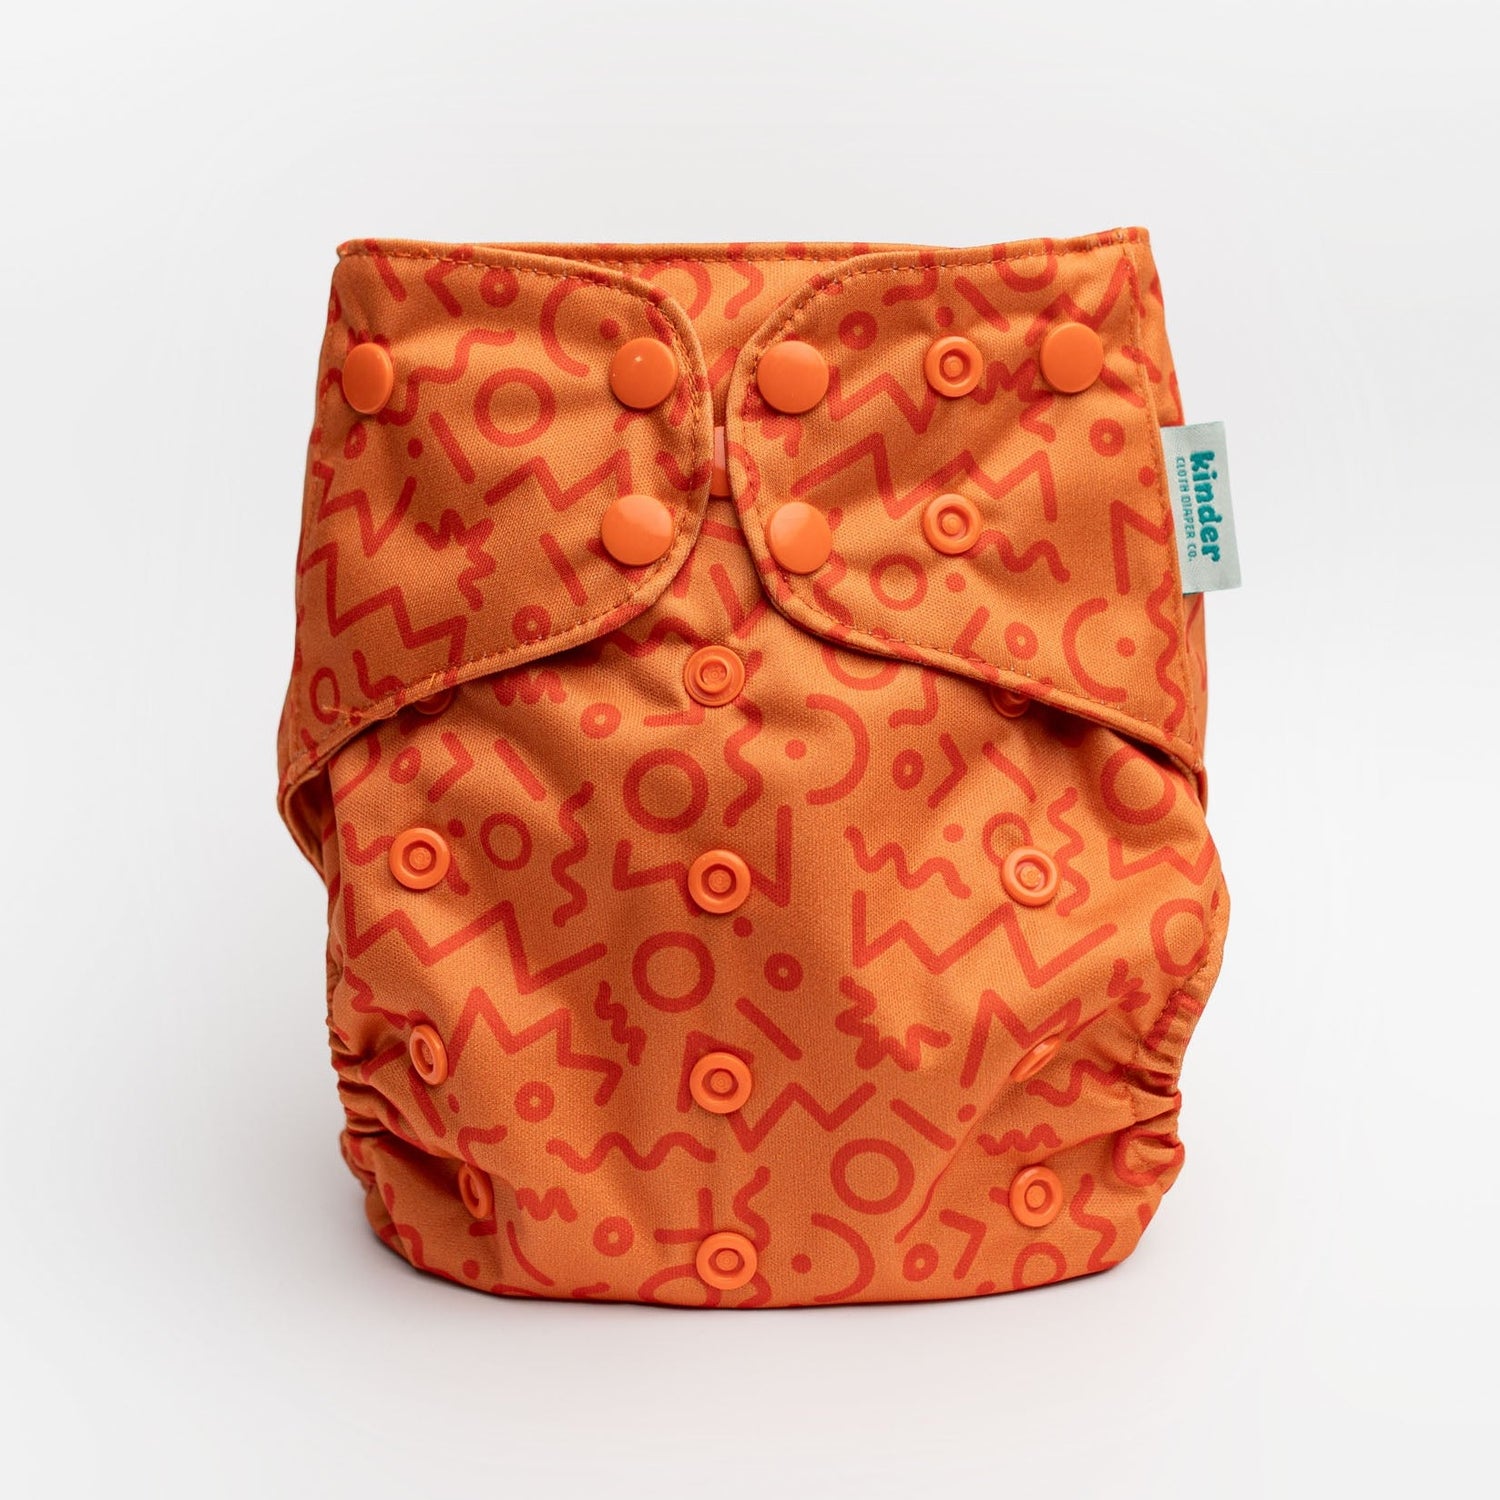 90s orange inspired cloth diaper with athletic wicking jersey mesh